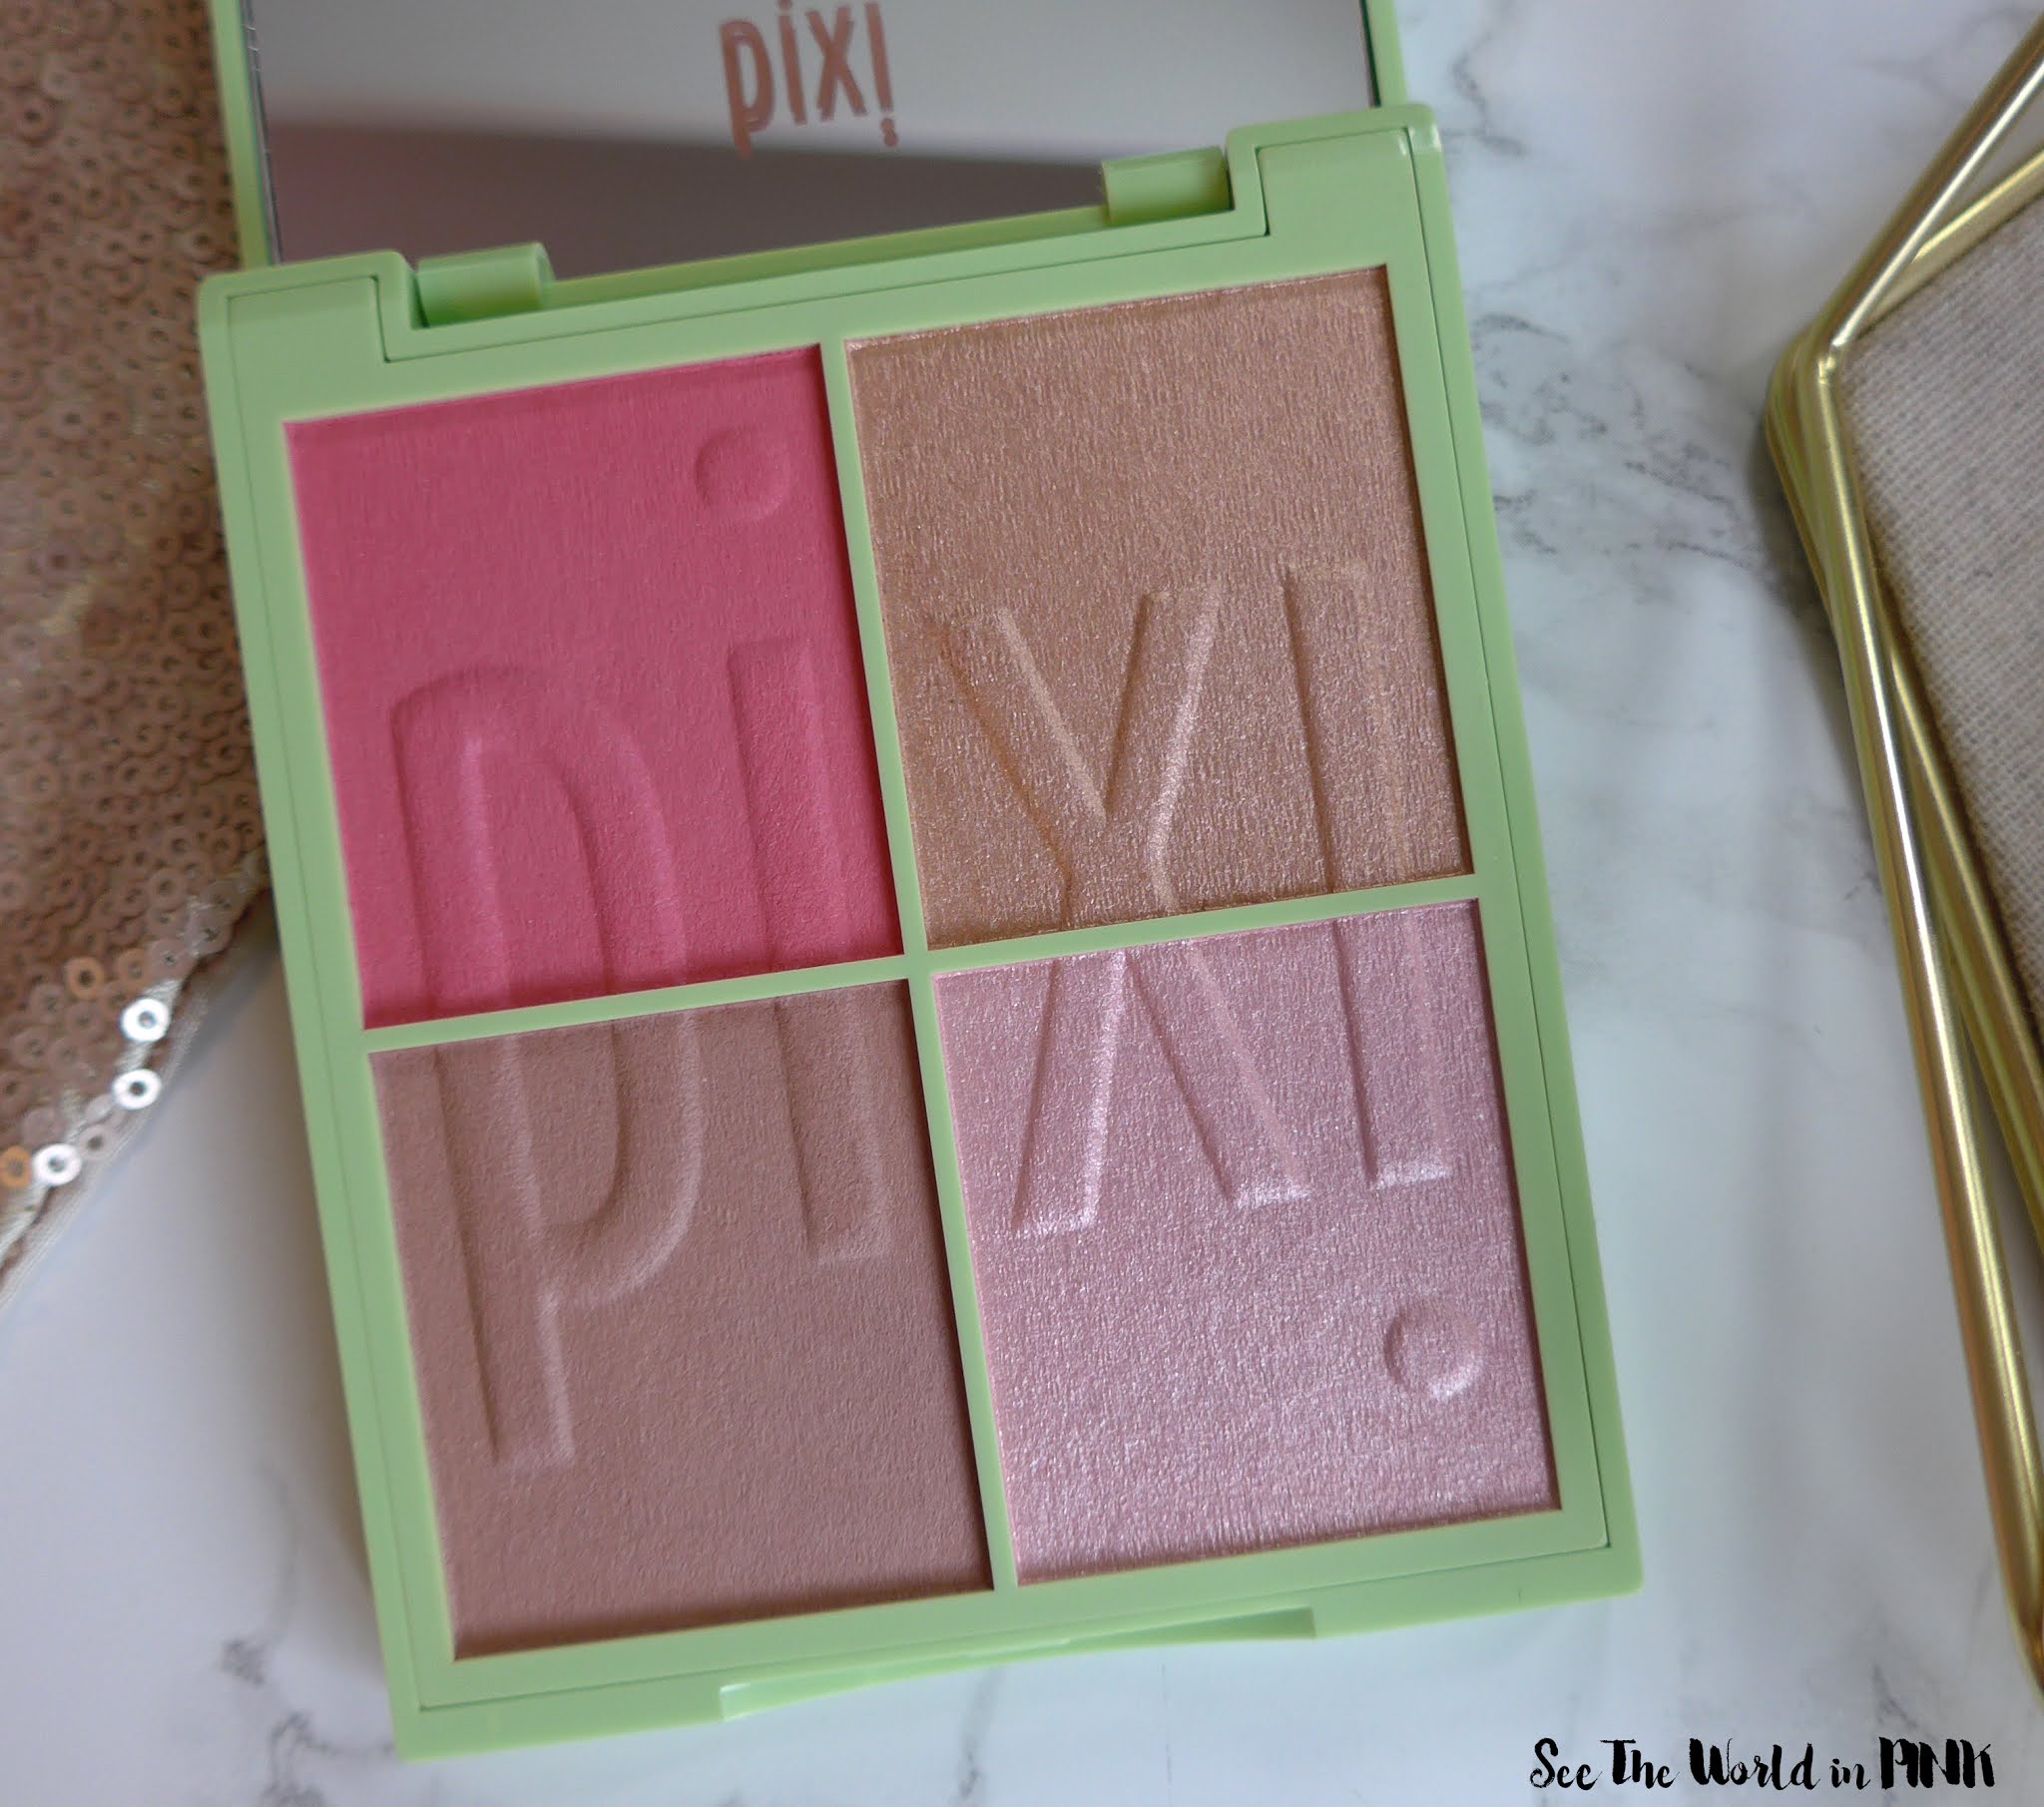 Pixi Beauty Eye Effects Shadow Palettes & Nuance Quartettes - Swatches, Try-ons & Thoughts